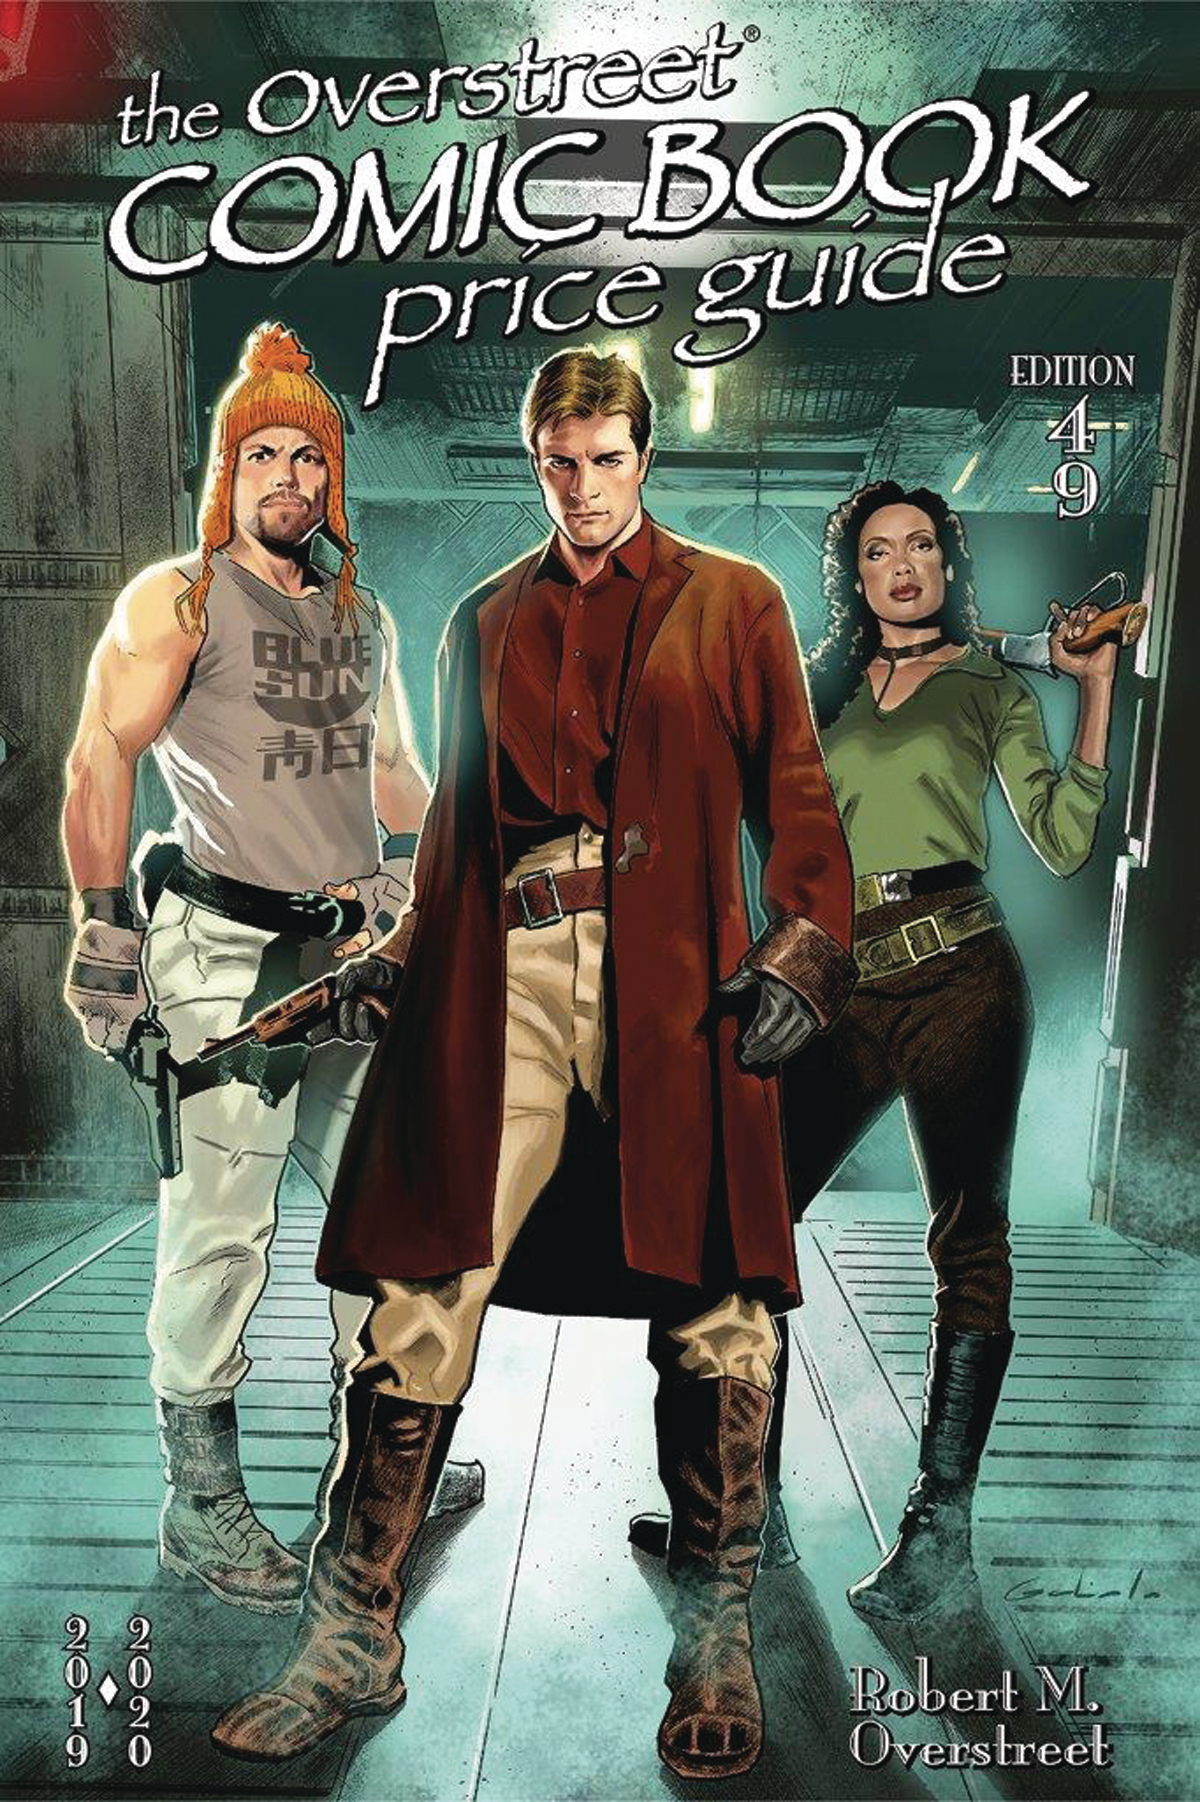 Overstreet Comic Book Price Guide Volume 49 Firefly